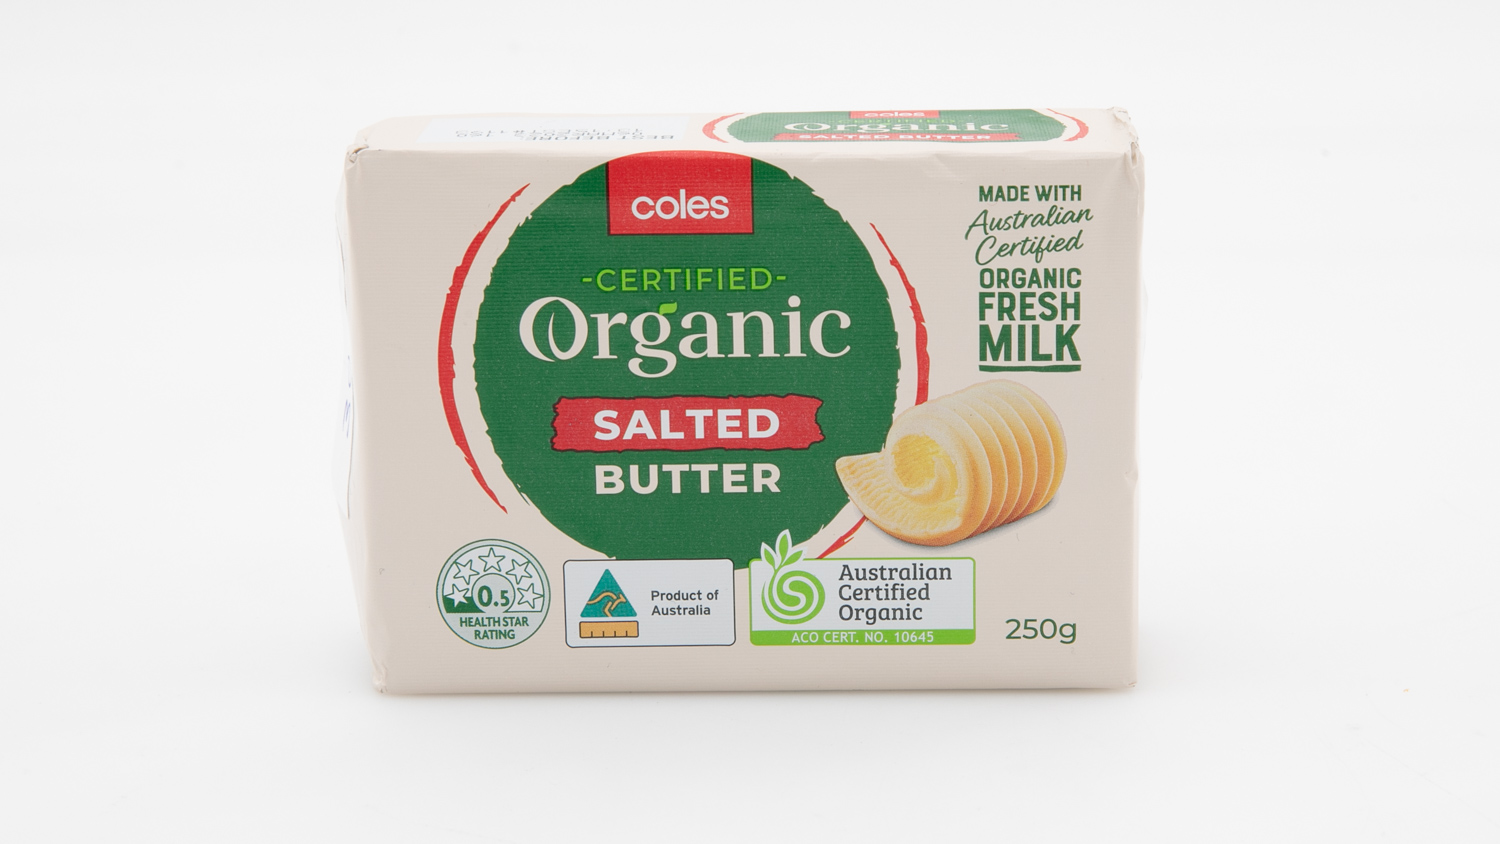 Coles Certified Organic Butter Salted carousel image